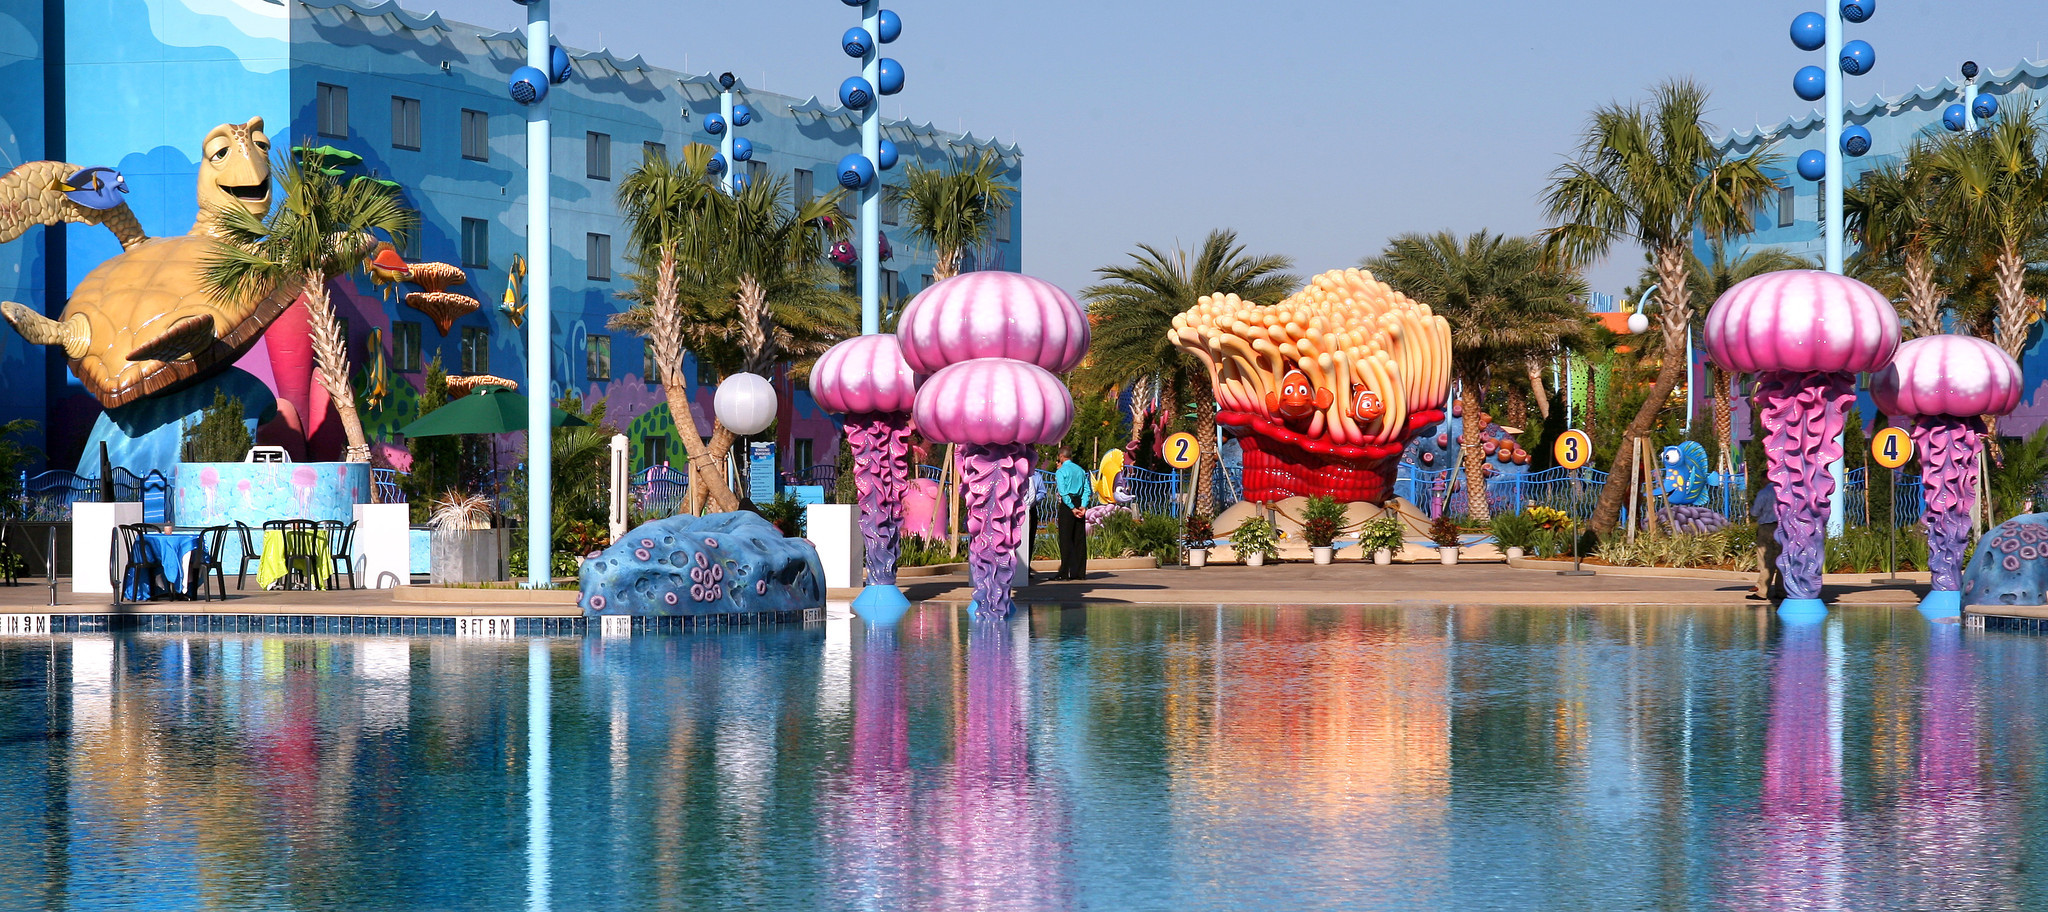 os-pictures-disneys-art-of-animation-resort